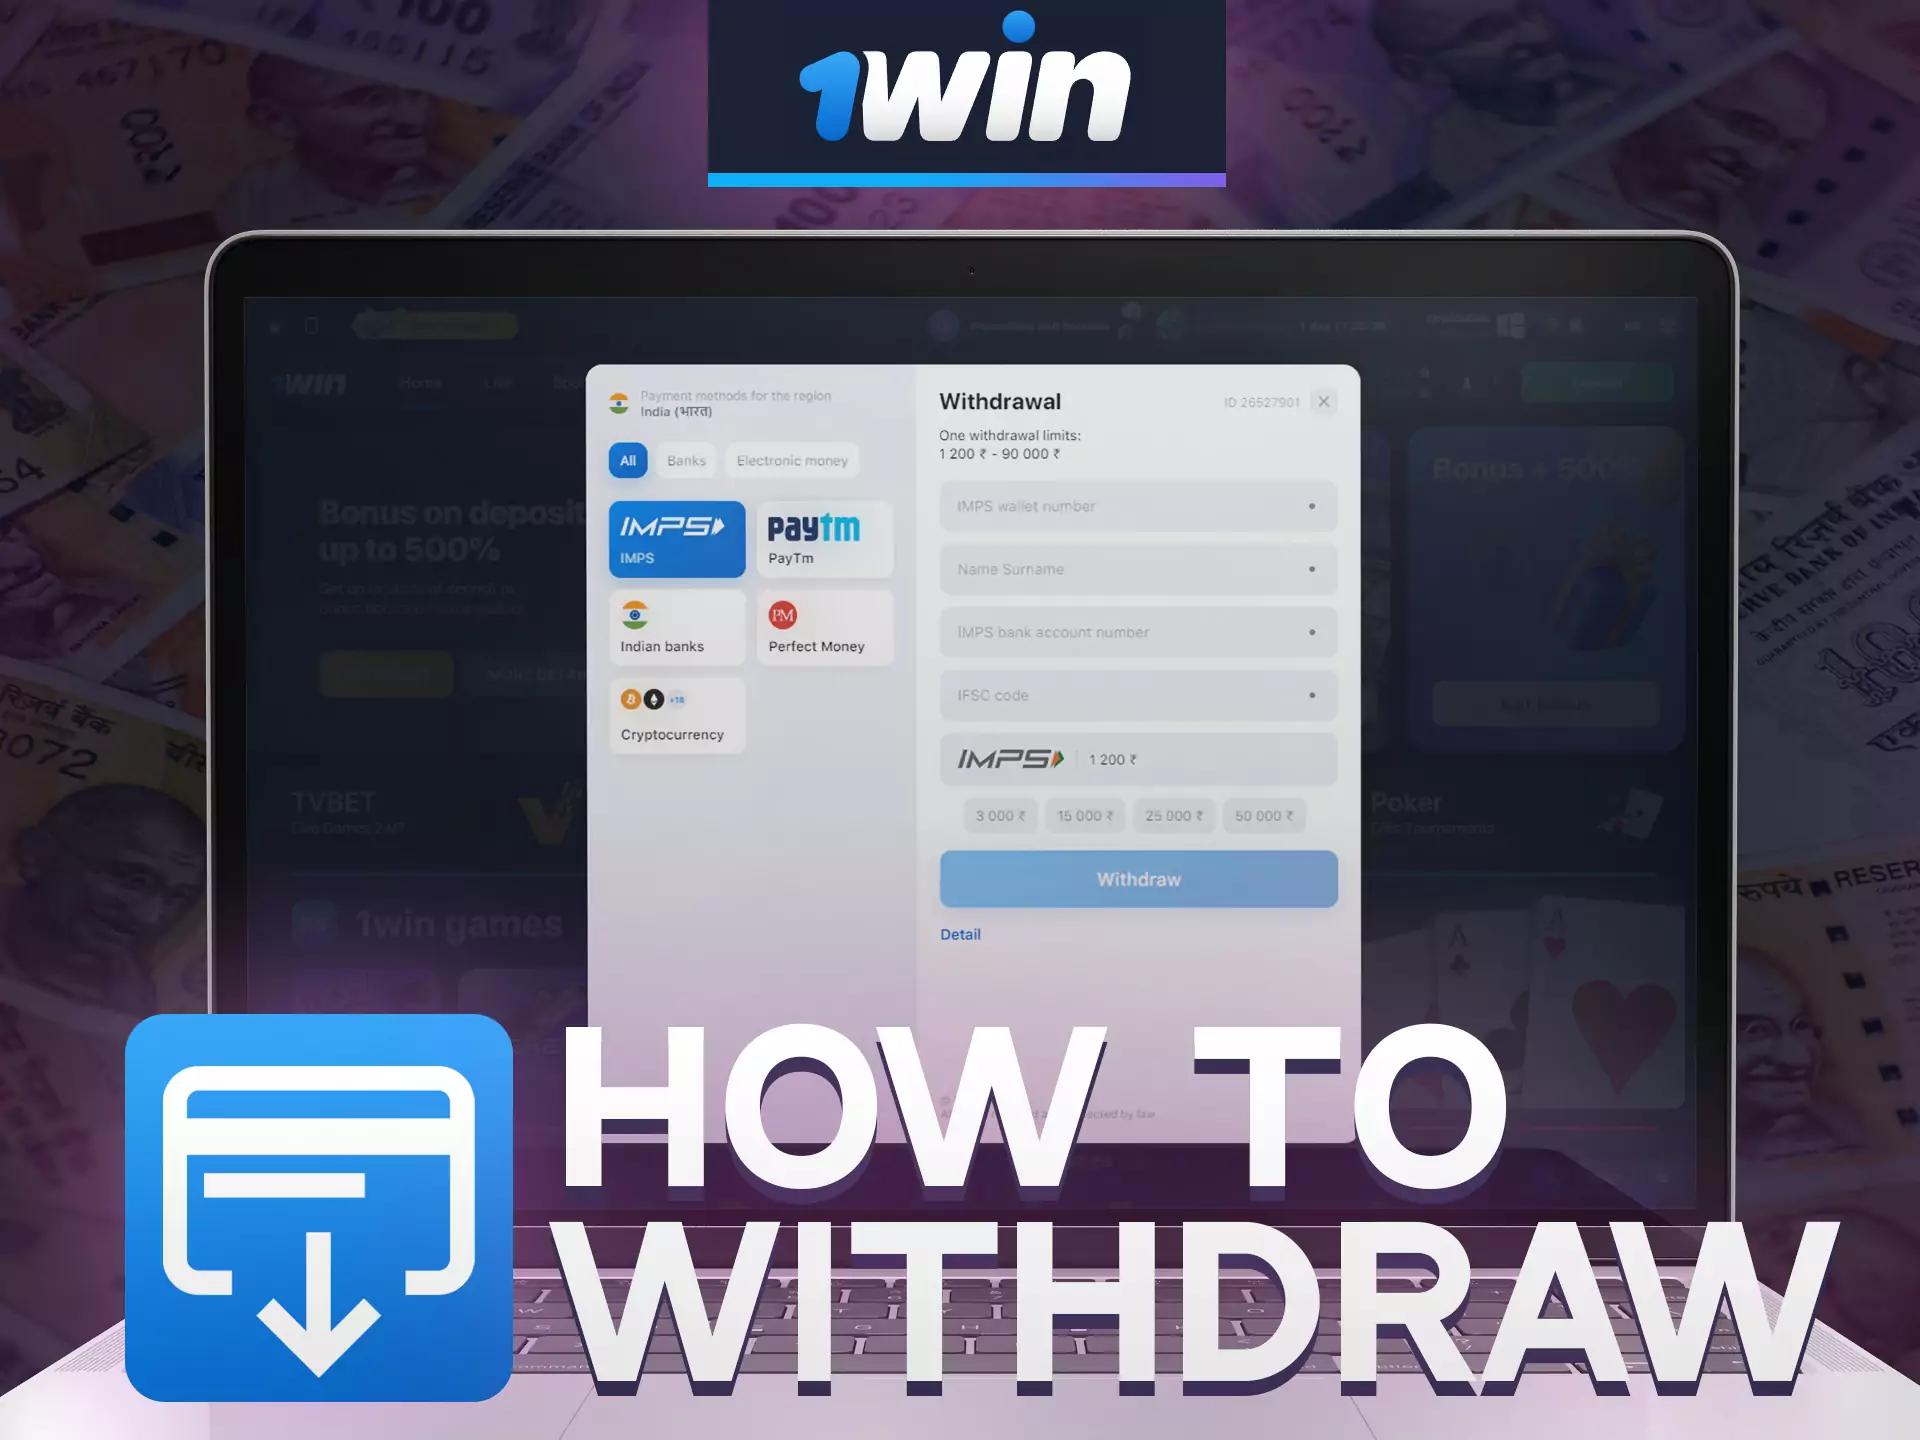 Withdraw money quickly and without troubles from 1win.